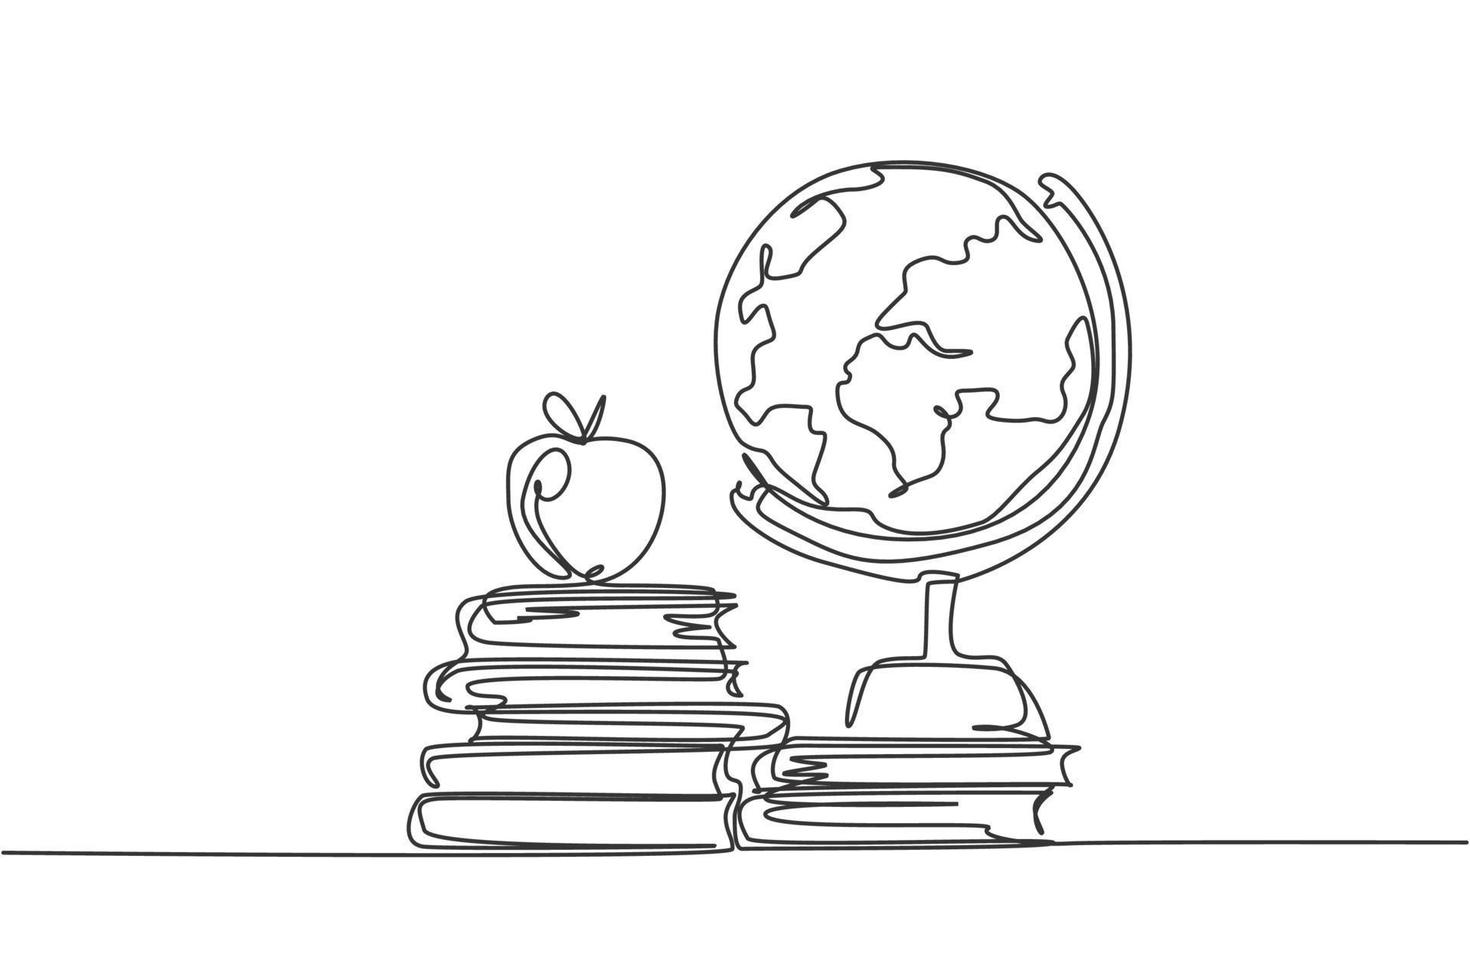 Earth globe on desk. Continuous one line drawing of books minimalist vector illustration design on white background. Isolated simple line modern graphic style. Hand drawn graphic concept for education